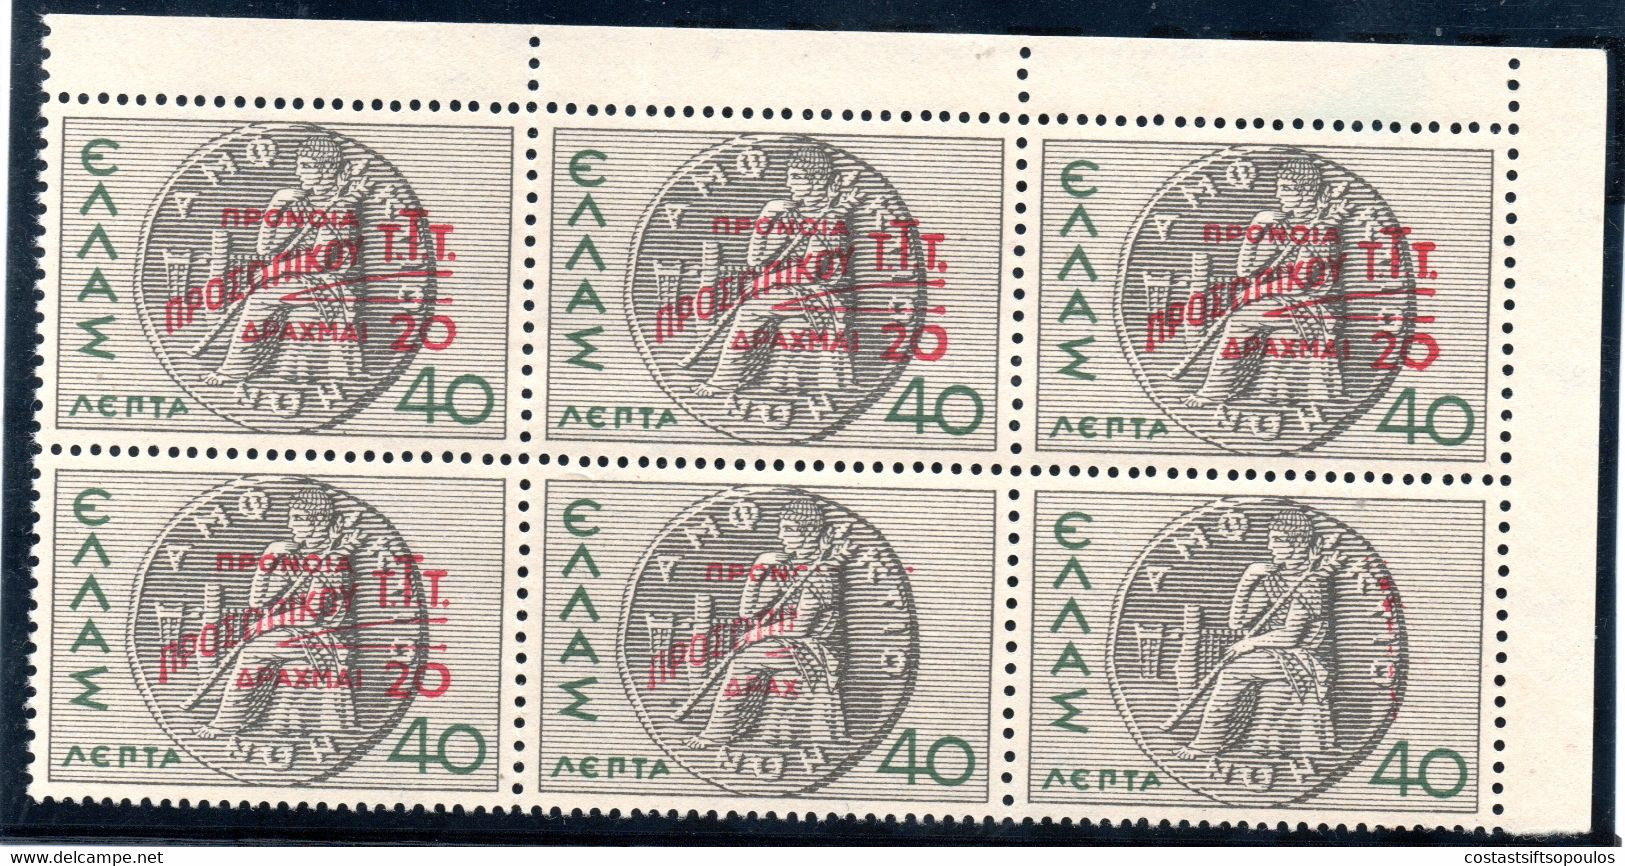 926.GREECE.1946 CHARITY COIN OF AMPHICTYONY HELLAS C96f MNH BLOCK OF 6 ONE WITHOUT OVERPR.VERY SCARCE - Varietà & Curiosità